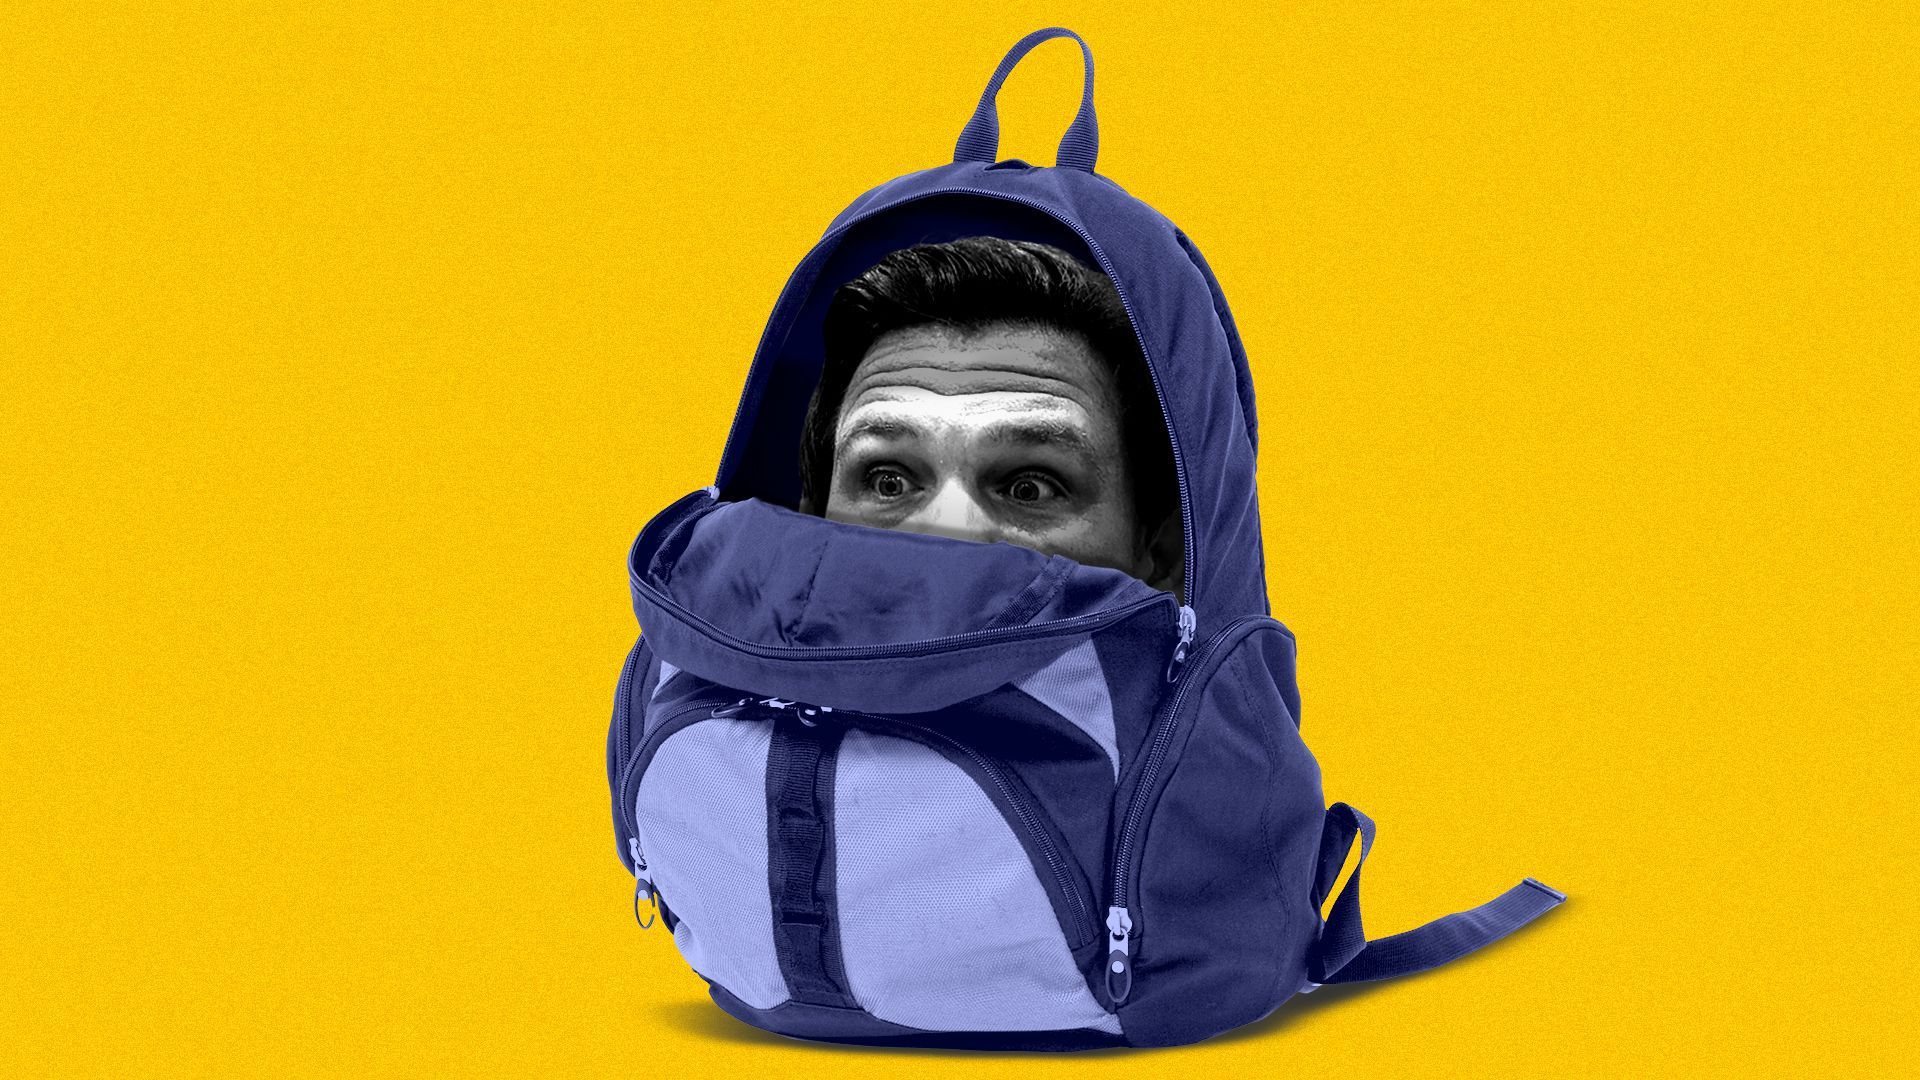 Ron DeSantis in a backpack